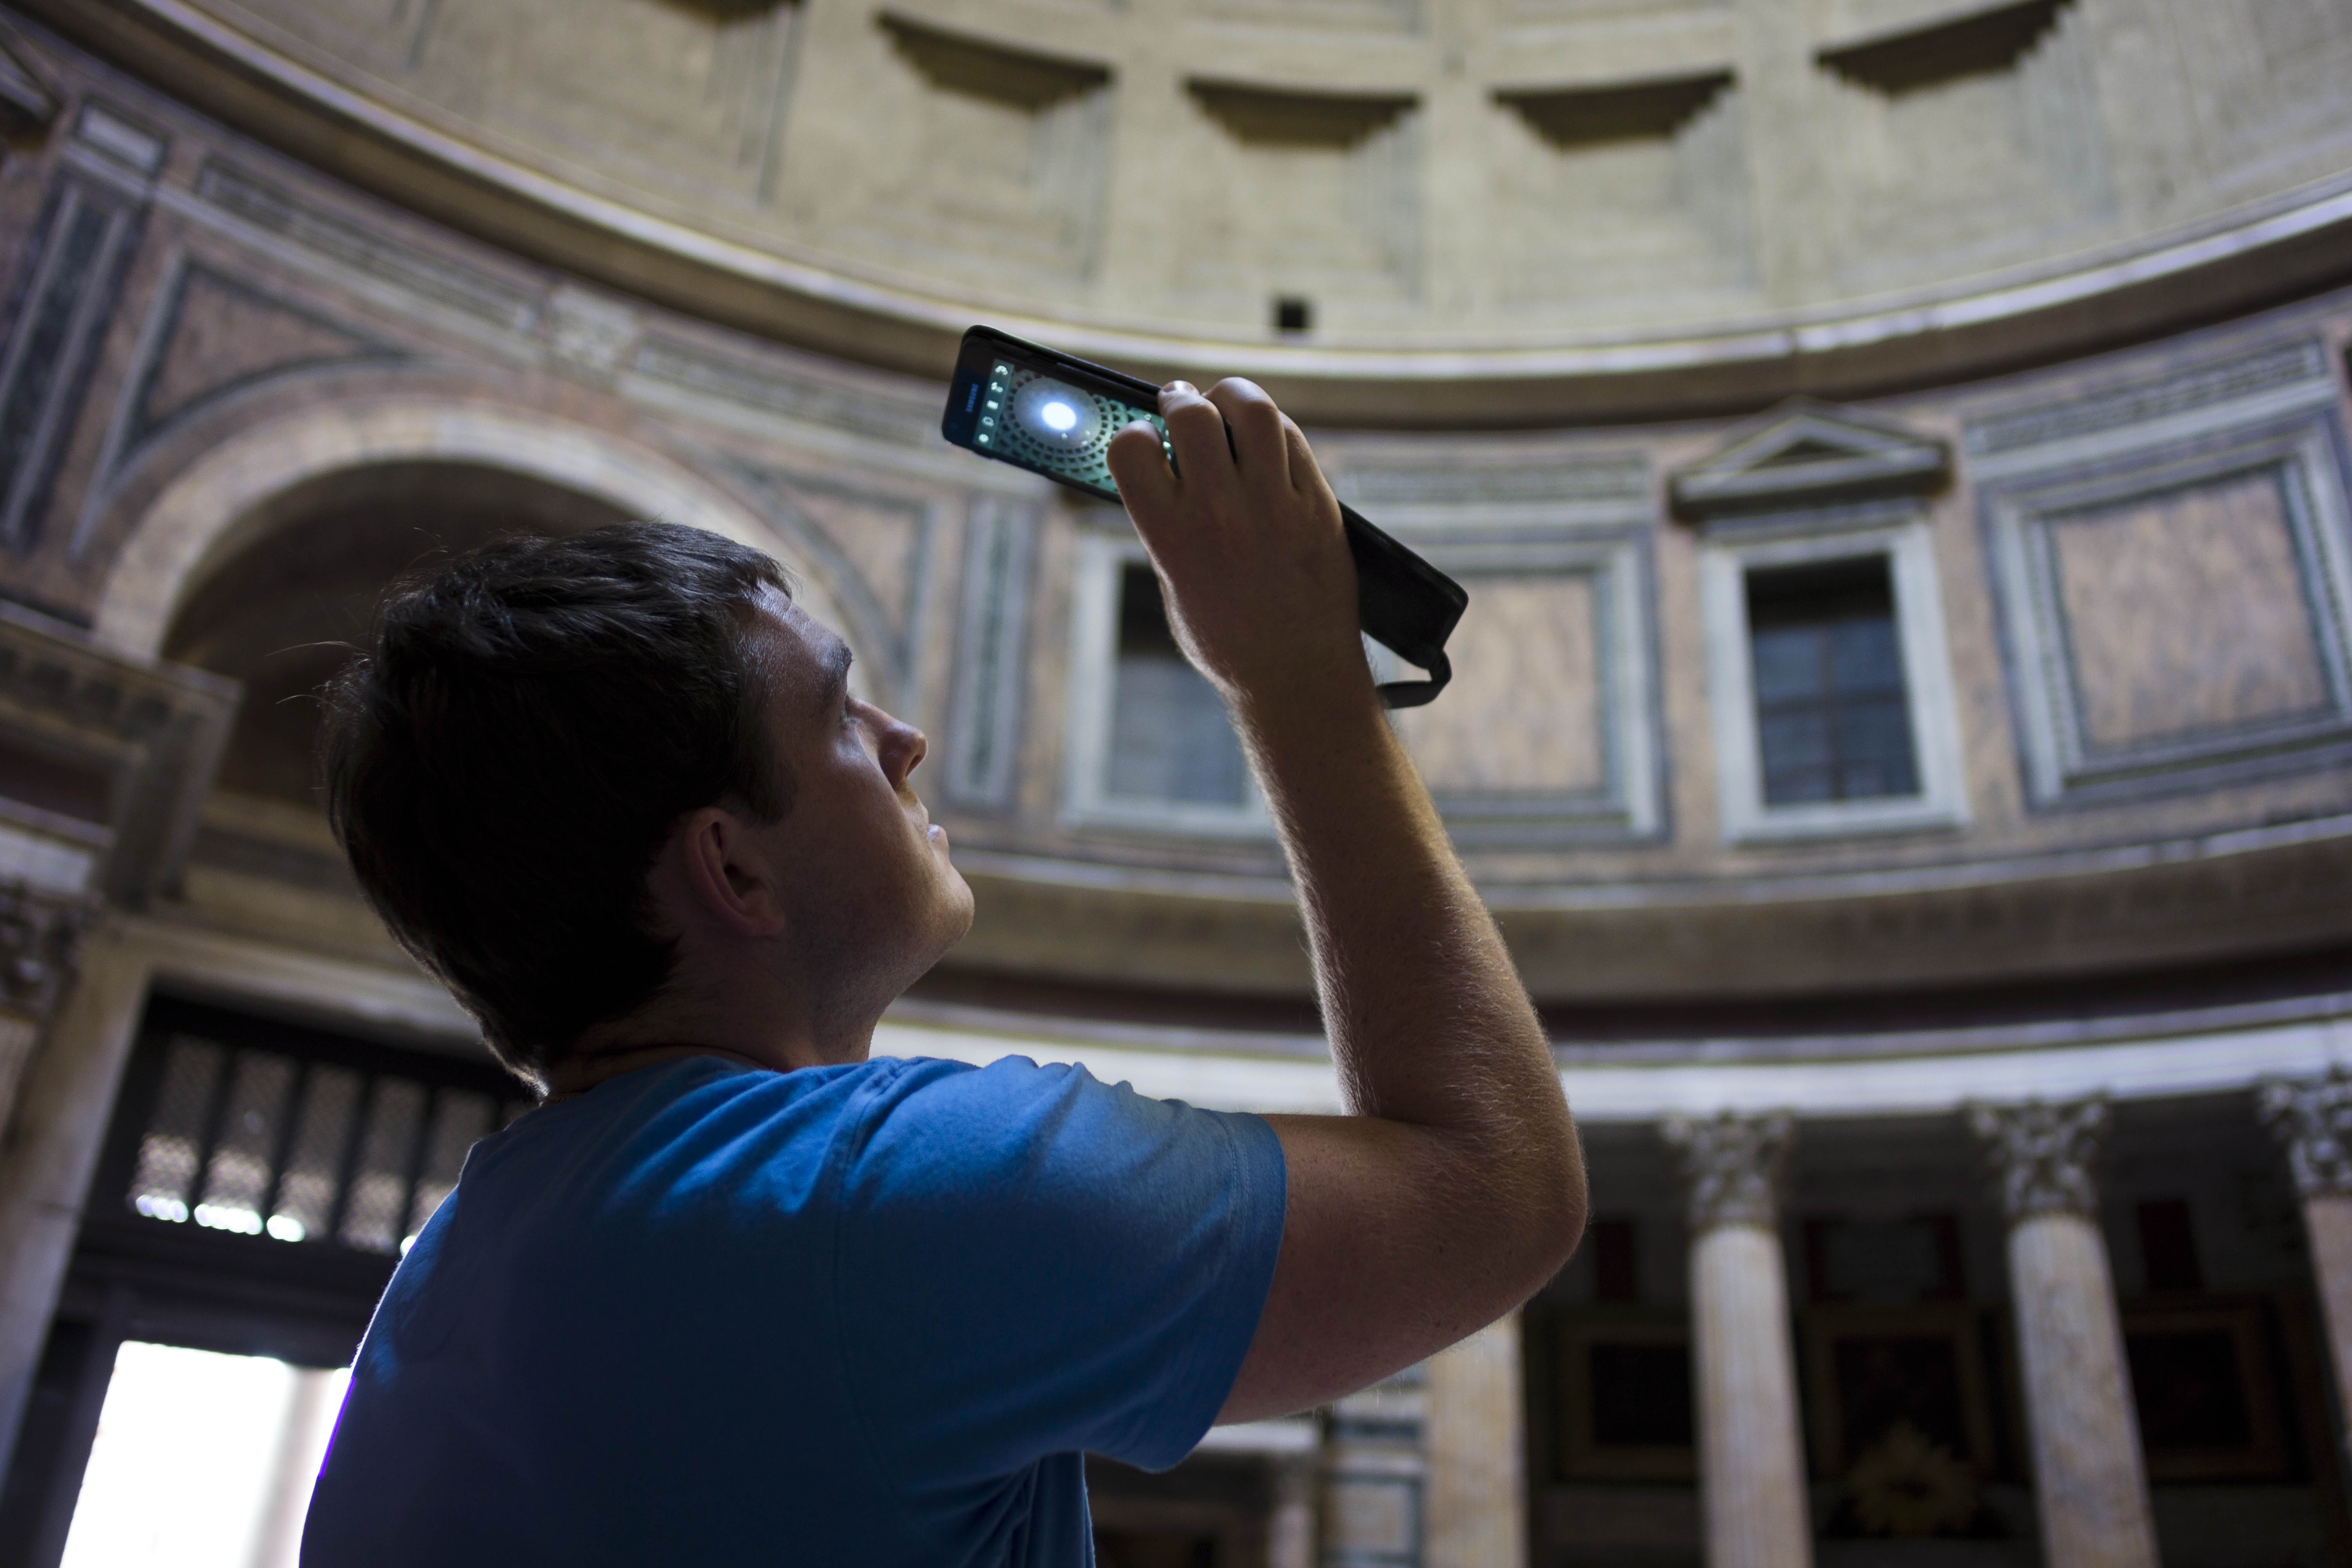 A man uses his mobile phone to take a picture of Pantheon's dome in Rome, Thursday, June 27, 2013. The Rome's Pantheon was  built under Roman Emperor Augustus between 27-25 BC to celebrate all Gods worshipped in ancient Rome and rebuilt under Emperor Adrian between 118 and 128 AD. The dome's central opening (Oculus) creates a beam of light that reflects on the temple's marble floor. ( AP Photo/Domenico Stinellis)